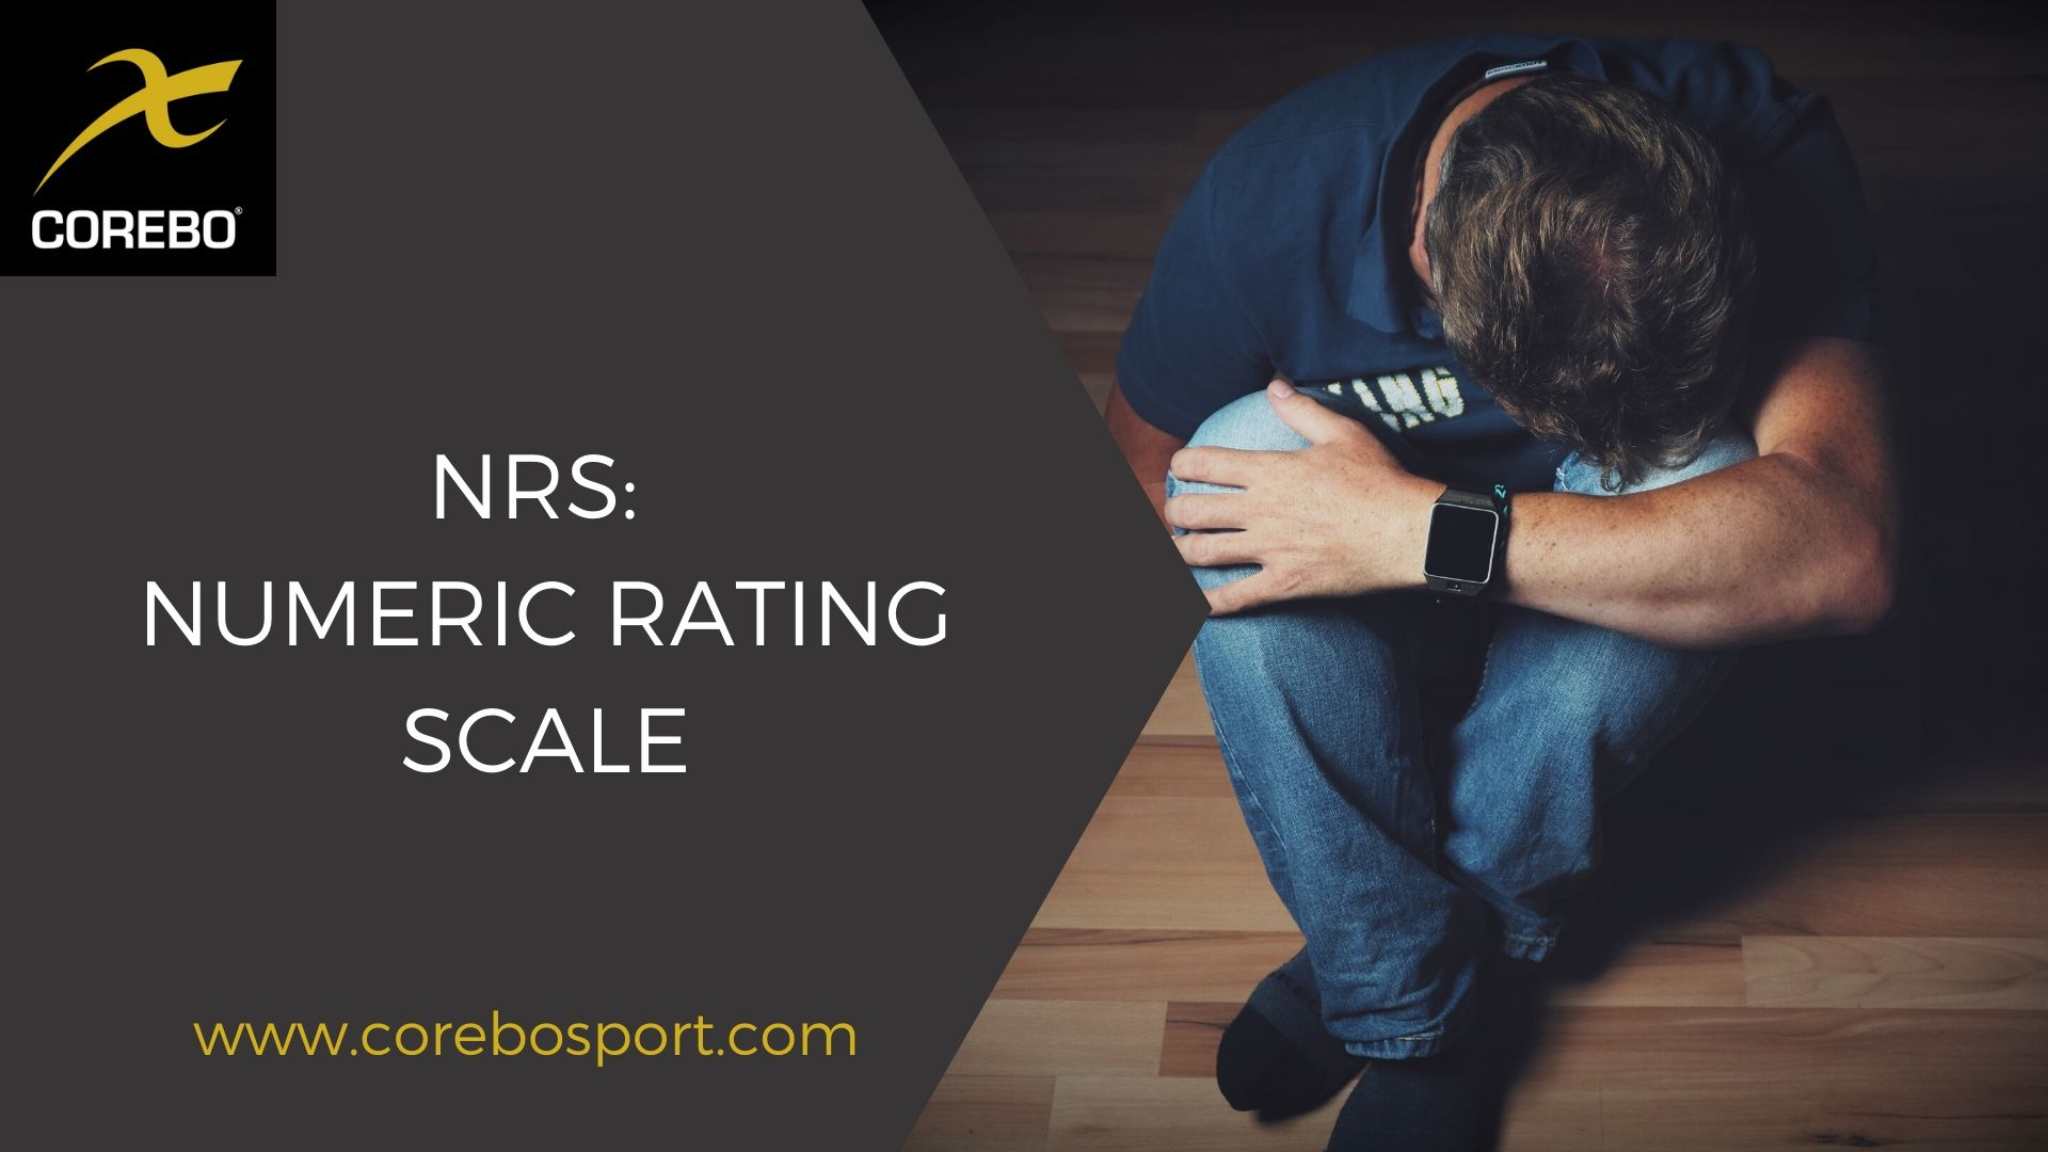 NRS o Numeric Rating Scale